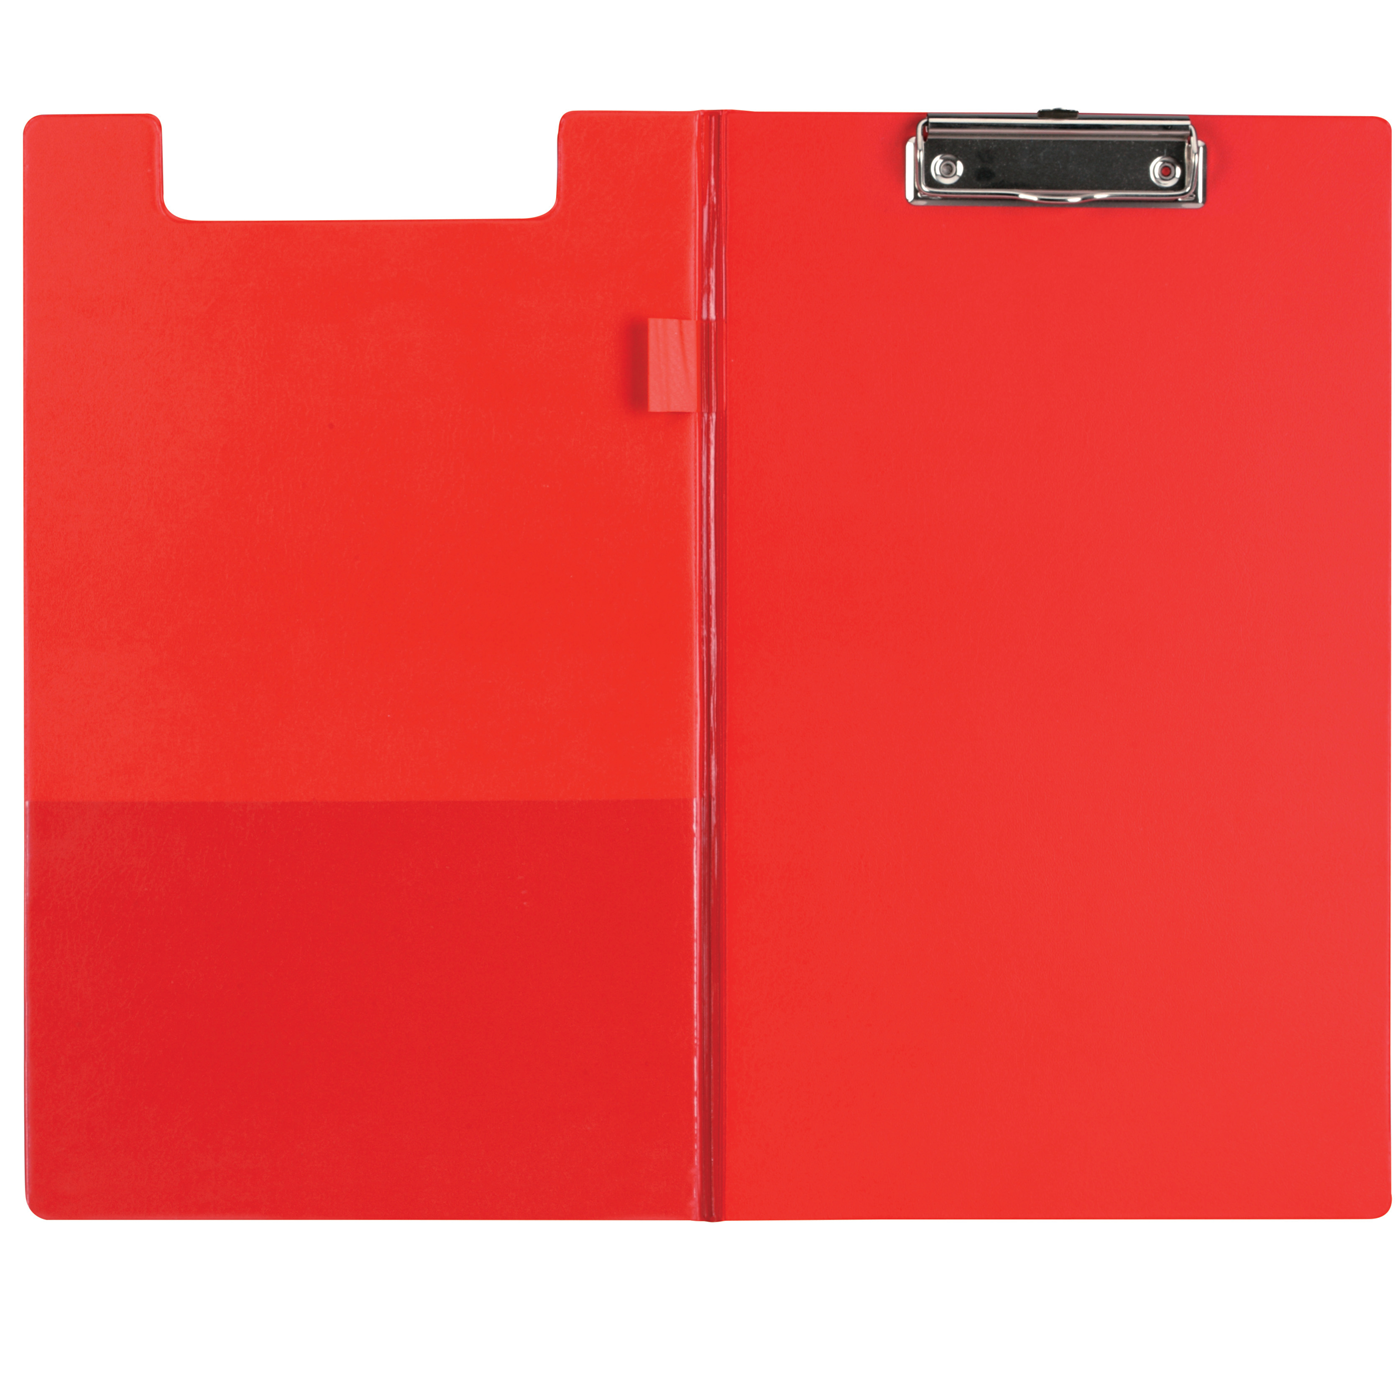 FM Clipboard with Flap Foolscap